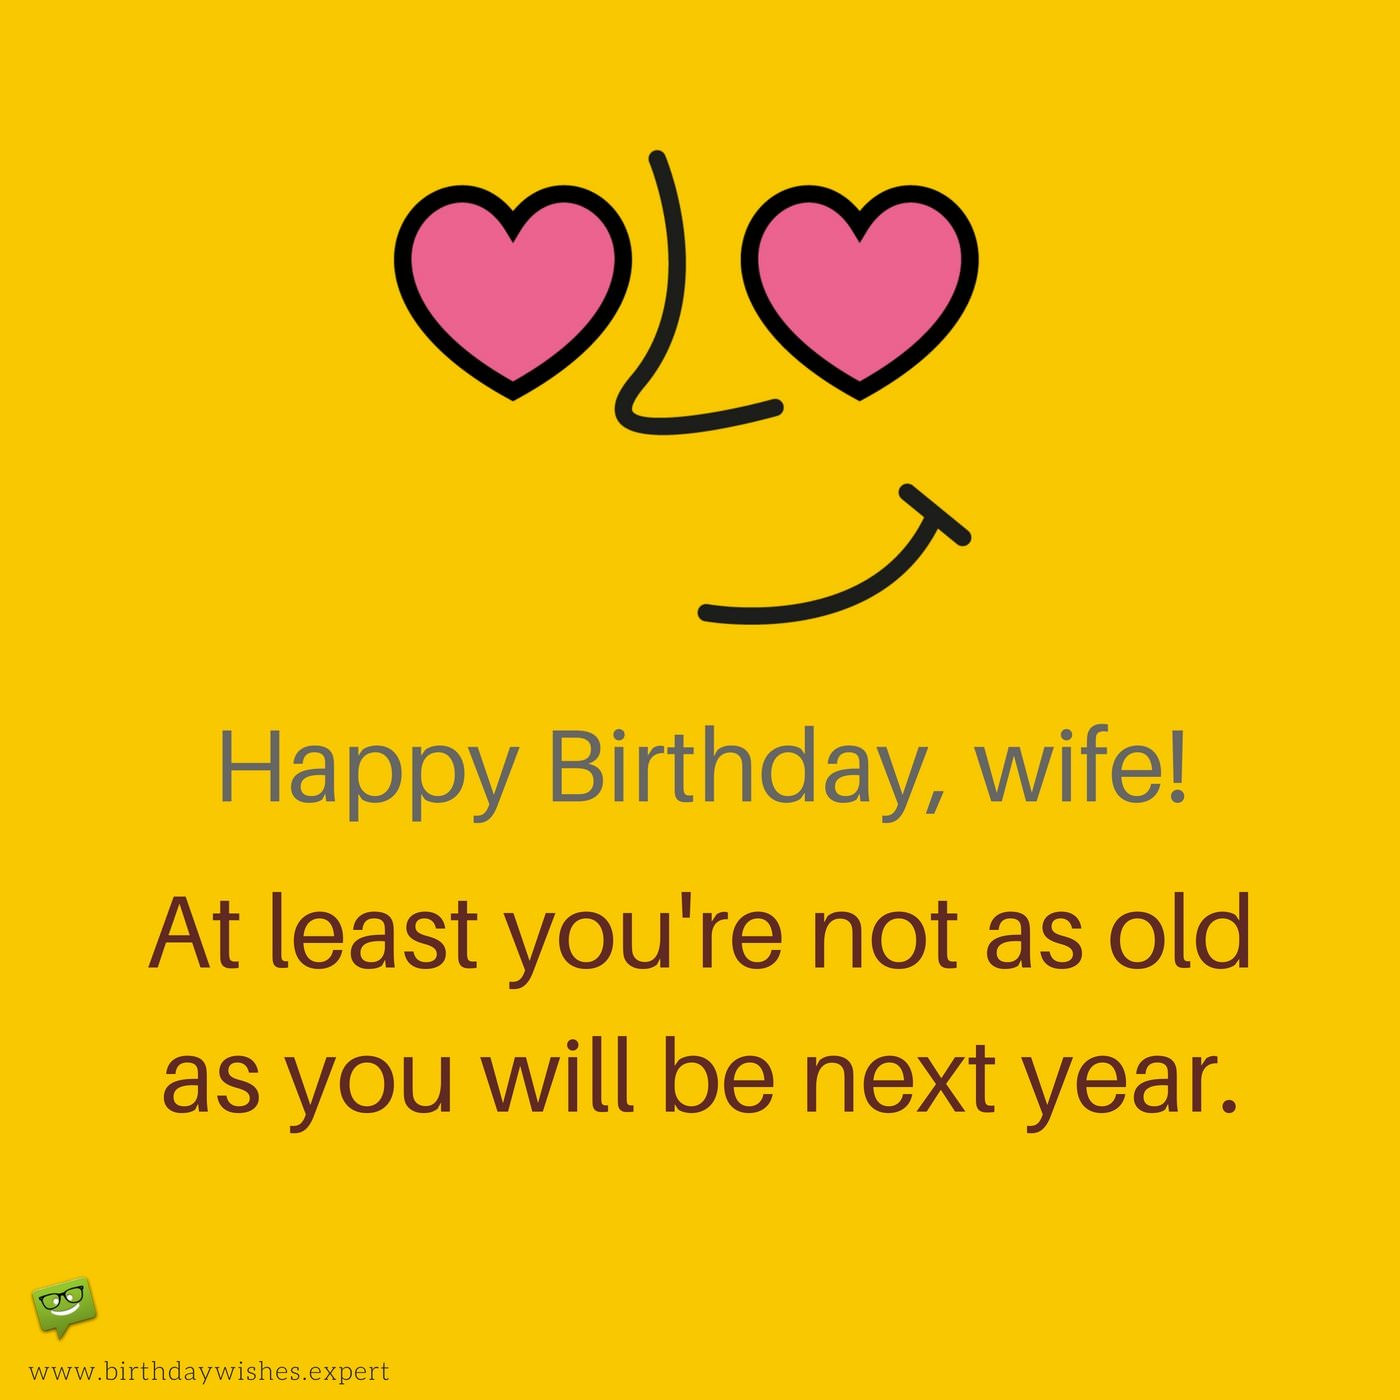 Funny Birthday Quotes For Wife
 The Funniest Wishes to Make your Wife Smile on her Birthday